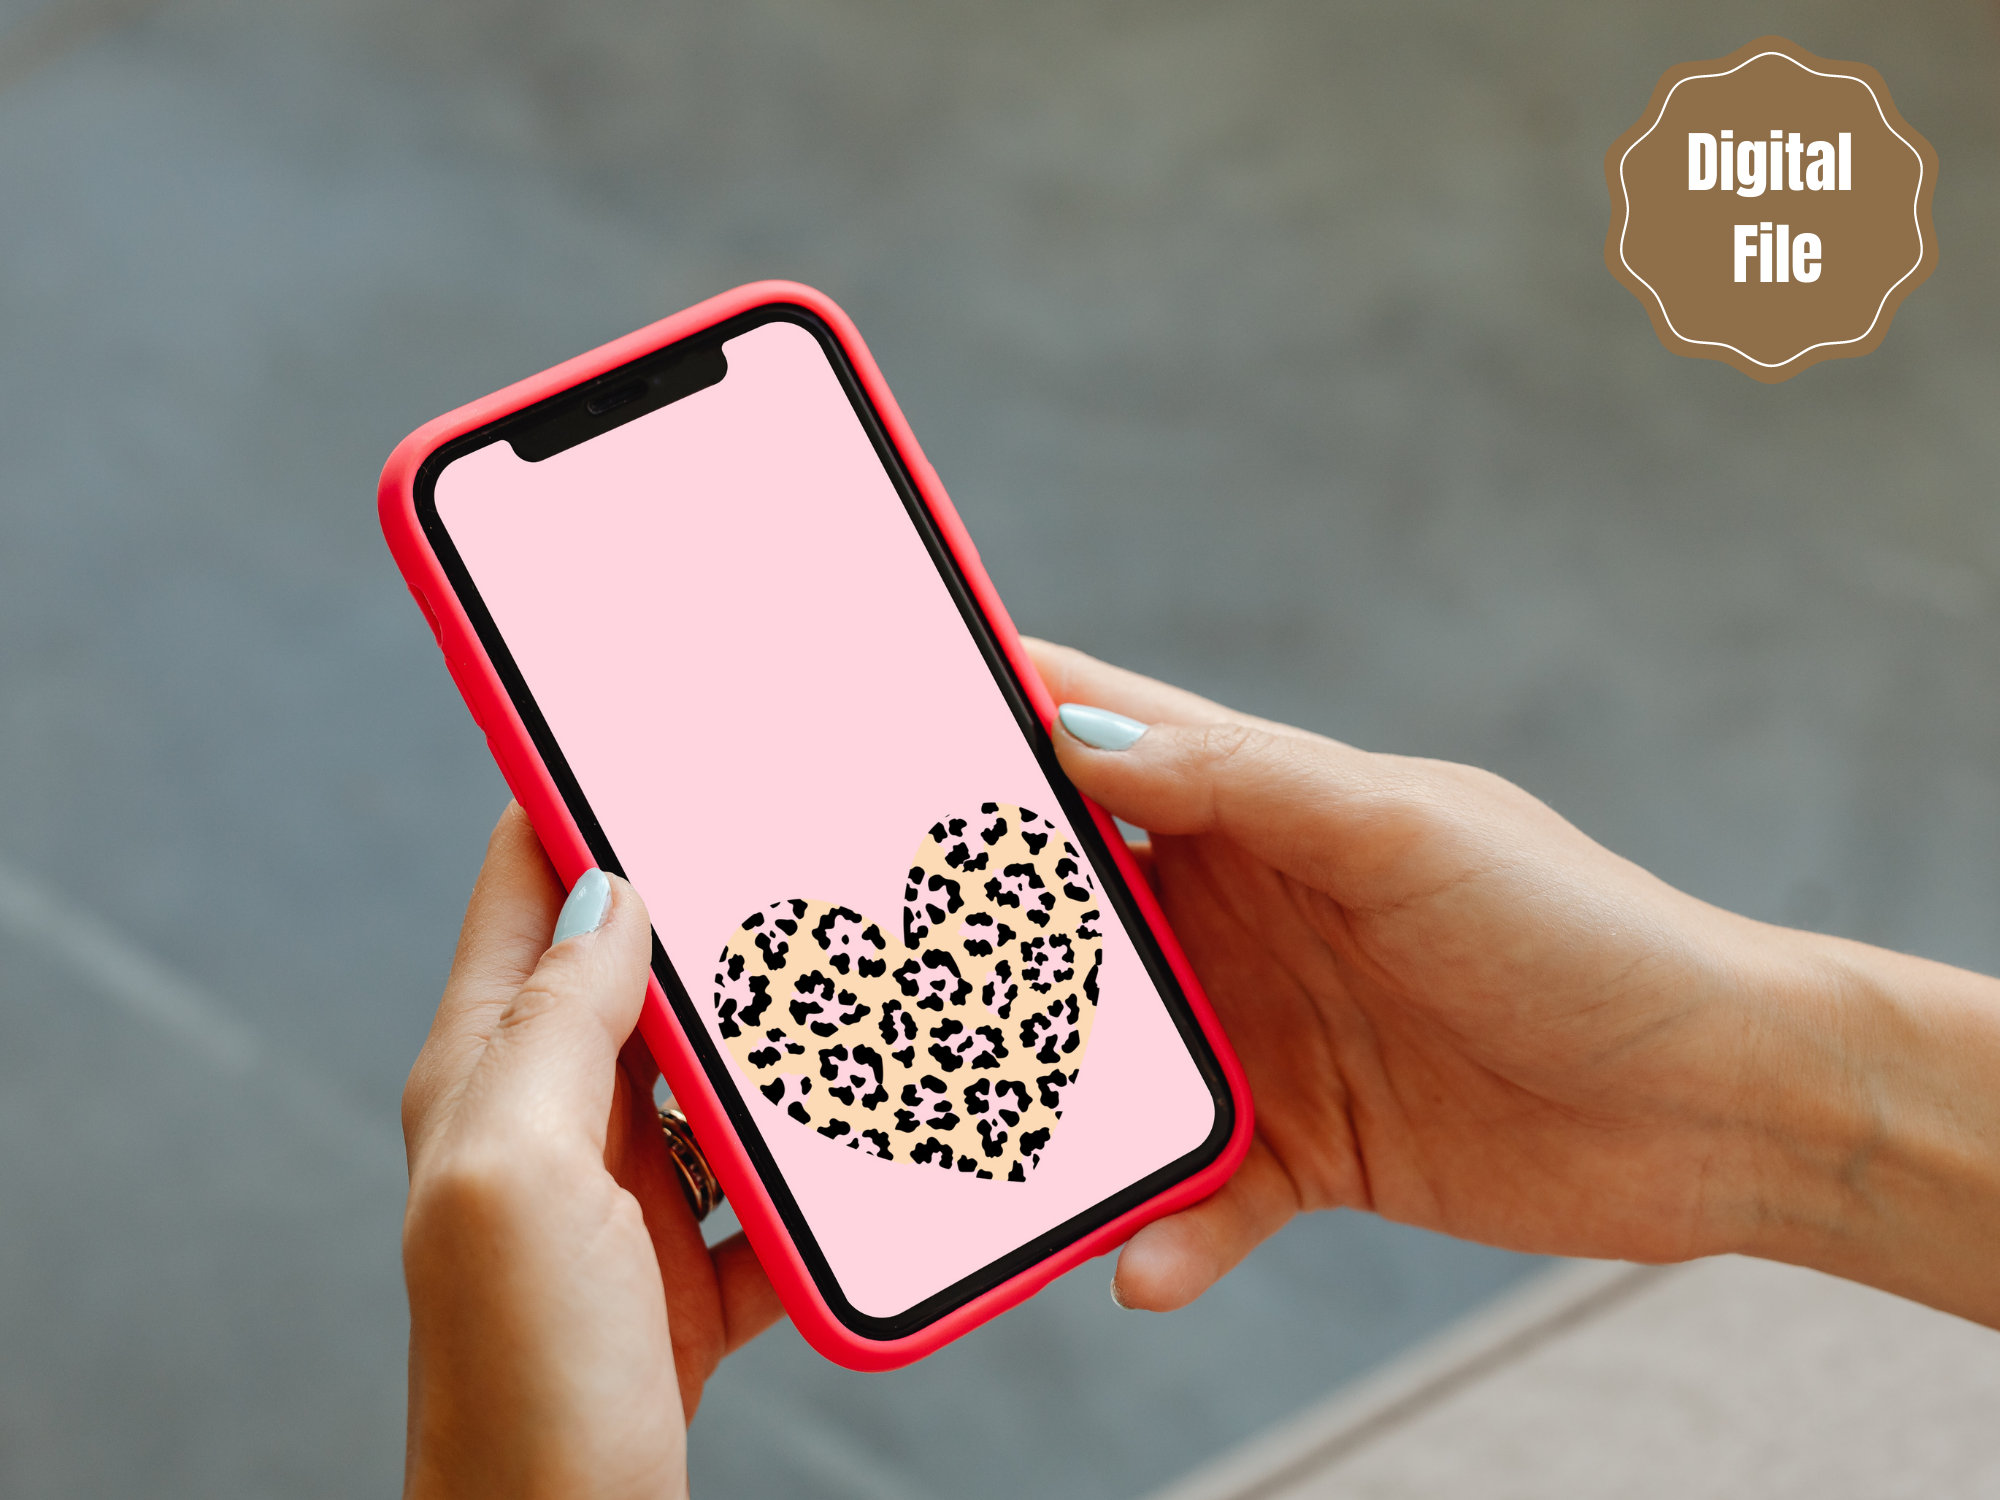 Cheetah Print Apple iPhone Wallpapers, 3 Pack of Cell Phone